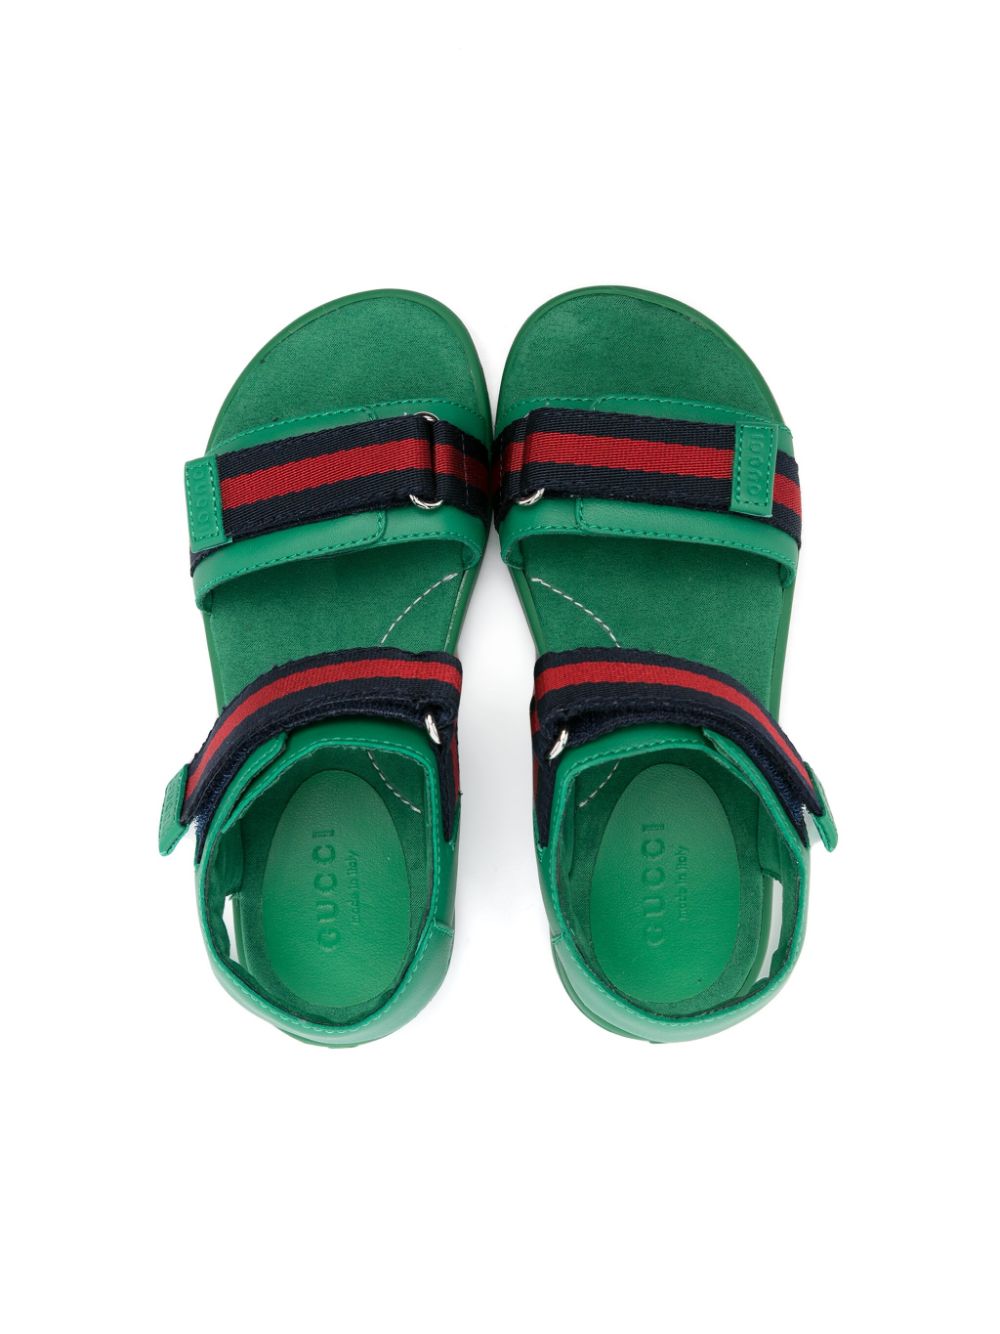 Green leather sandals for girls